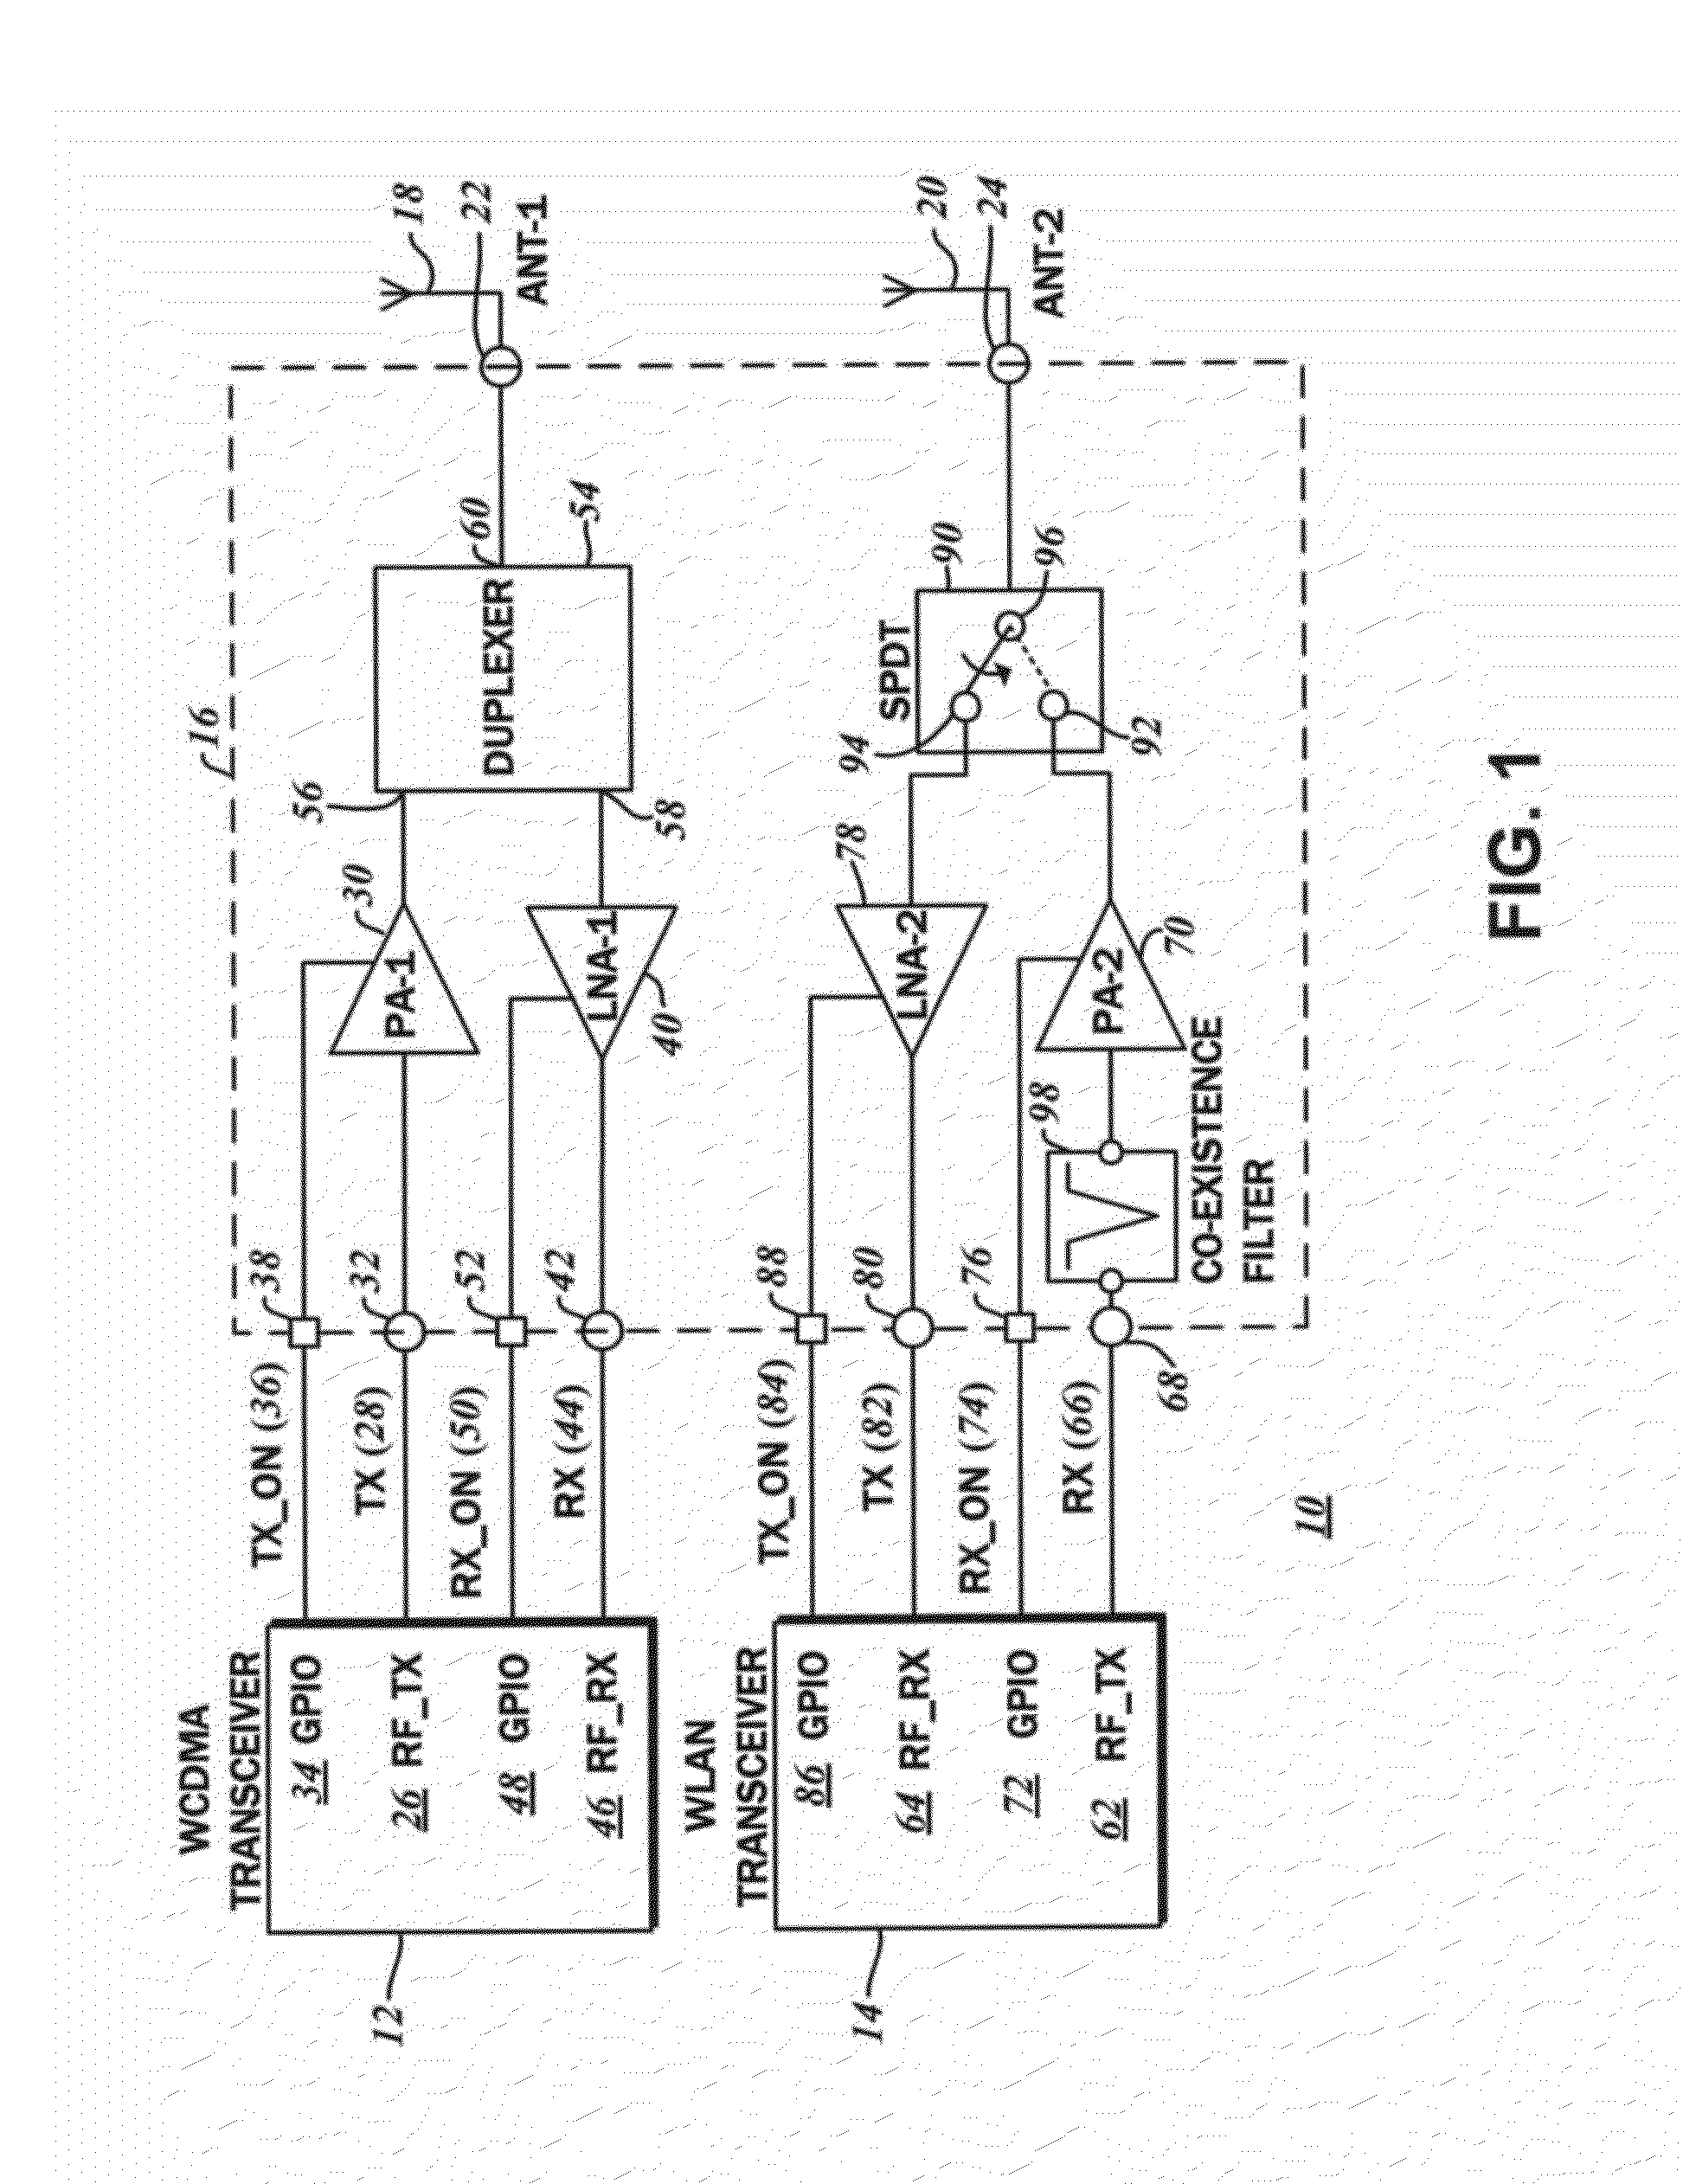 Power amplifier with co-existence filter